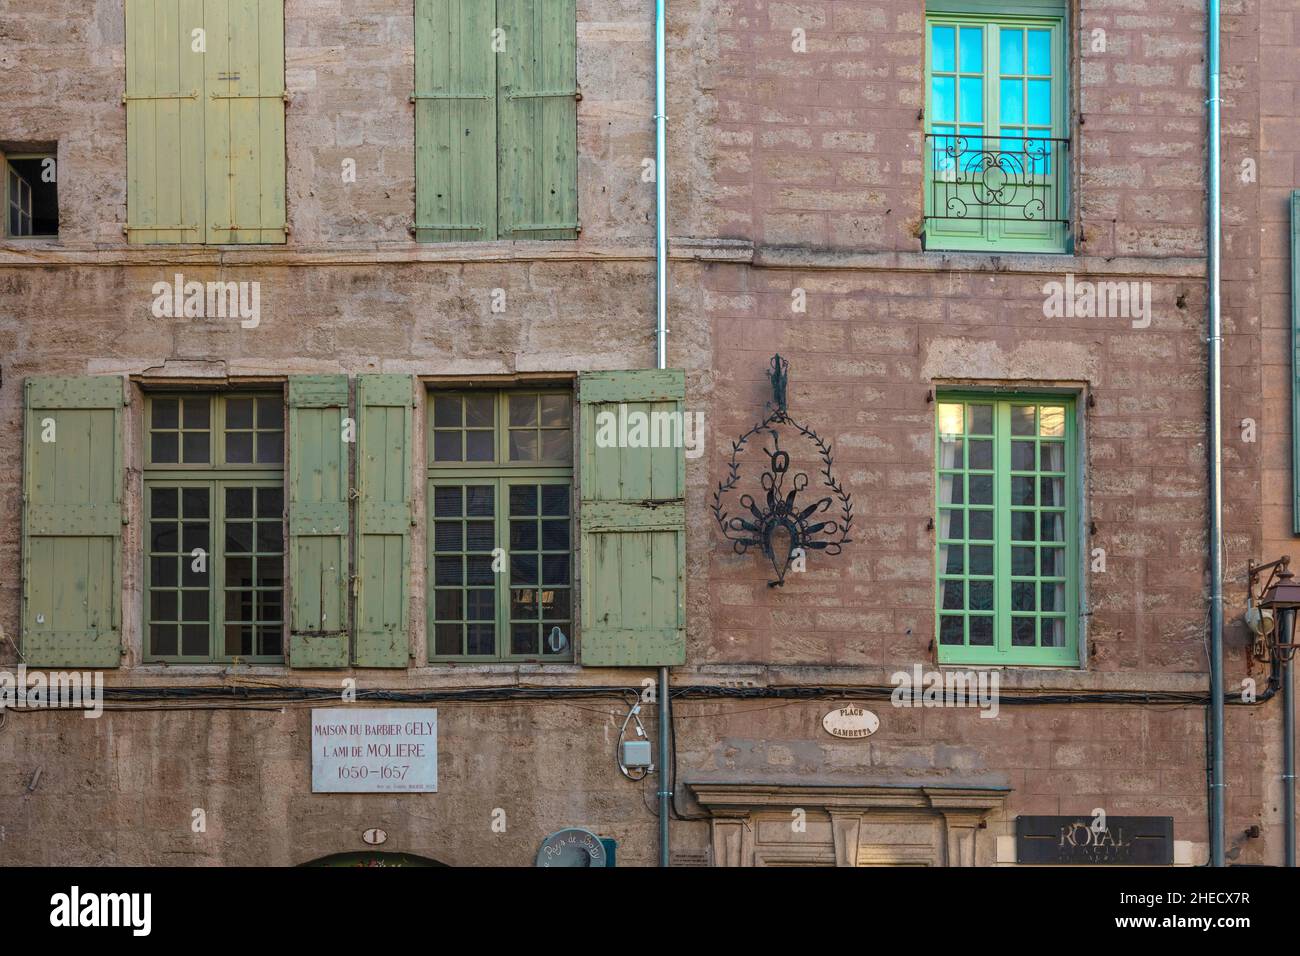 France, Herault, Pezenas, facade of an old historic building Stock Photo